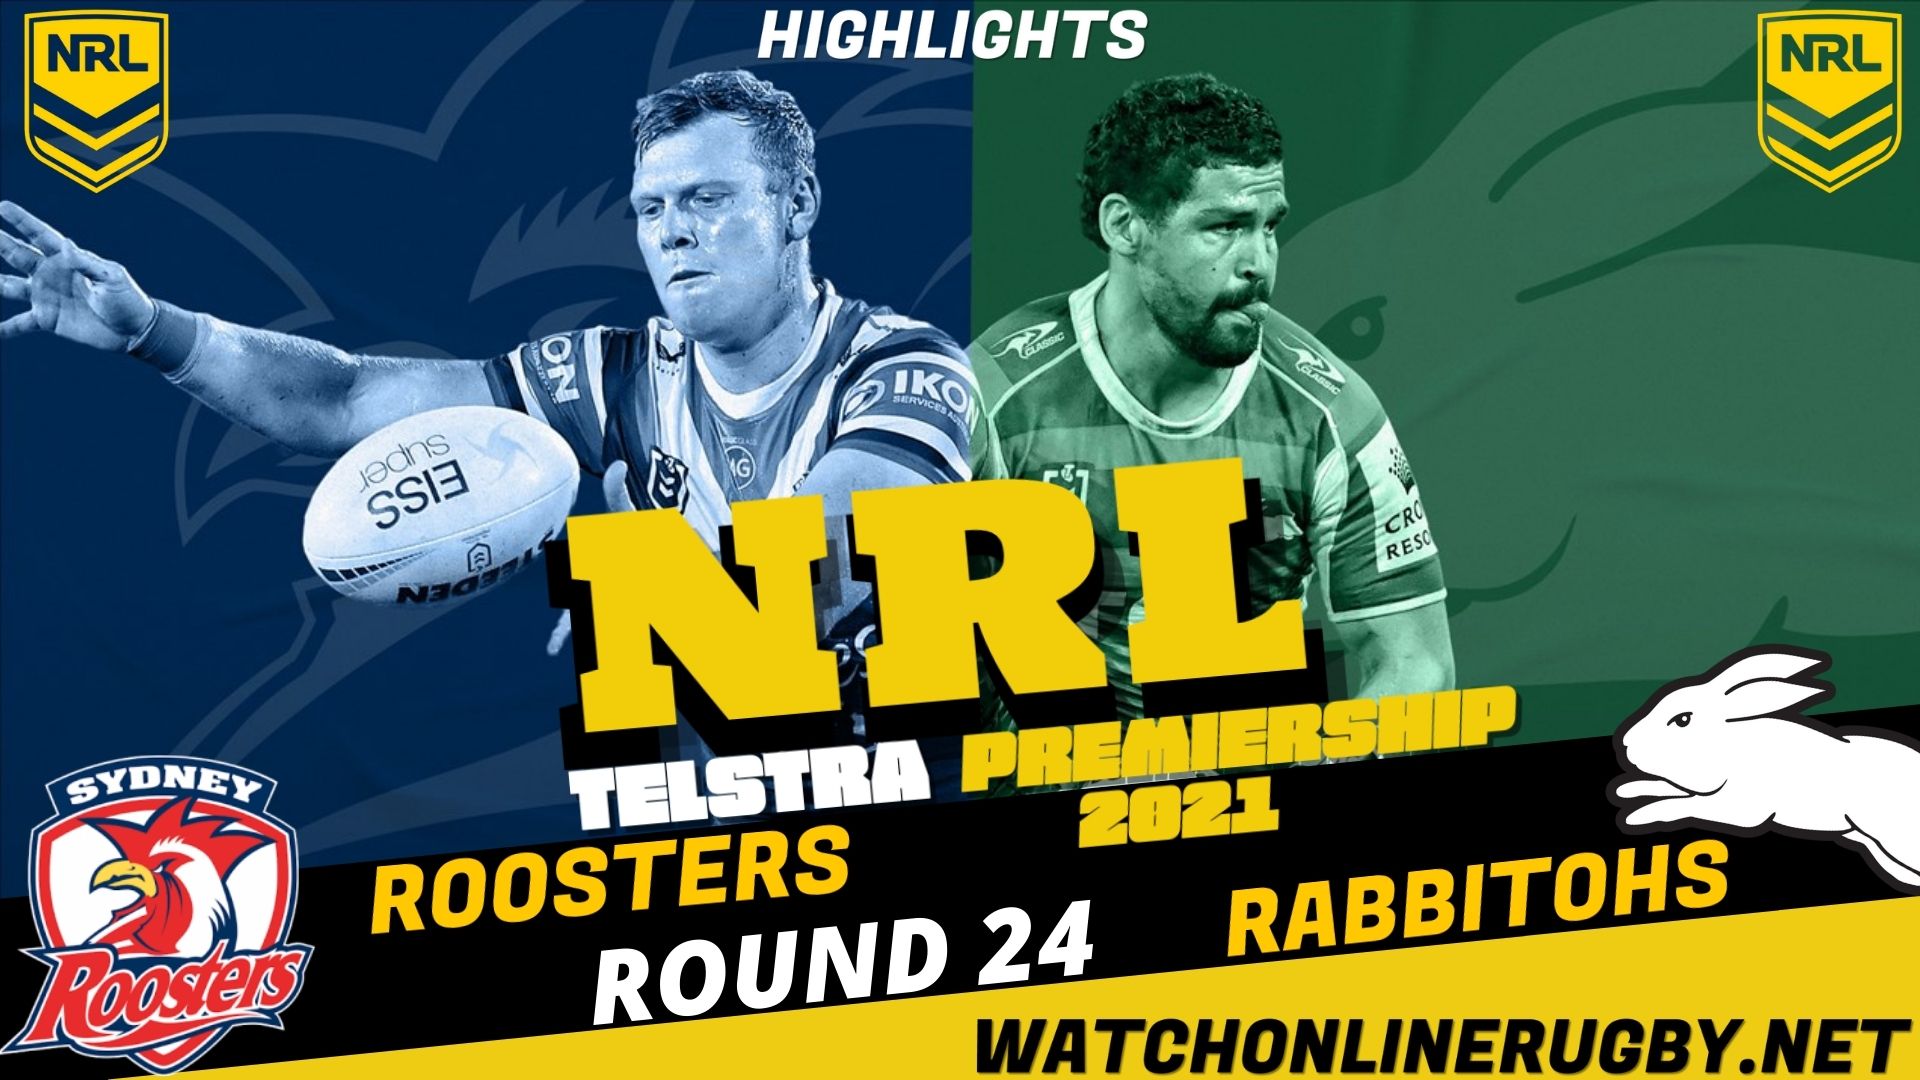 Roosters Vs Rabbitohs Highlights RD 24 NRL Rugby